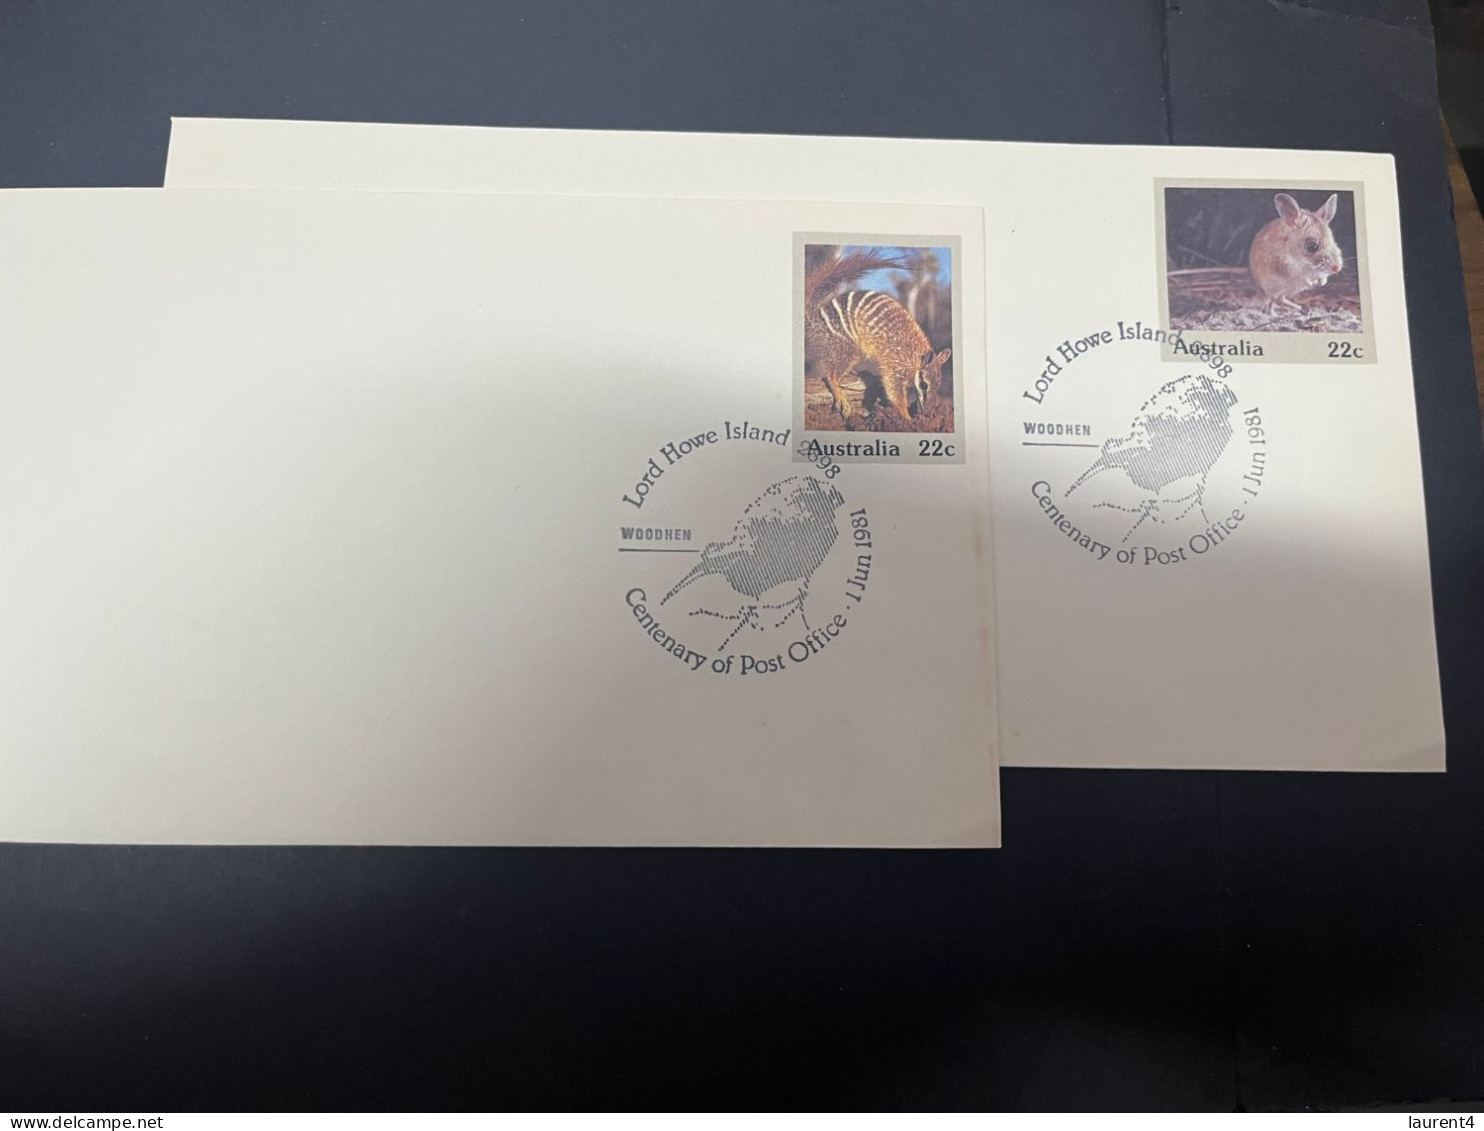 2-5-2024 (3 Z 39) Australia FDC - 1981 - Lord Howe Island - Wooden (special P/m) 2  Covers - Primo Giorno D'emissione (FDC)